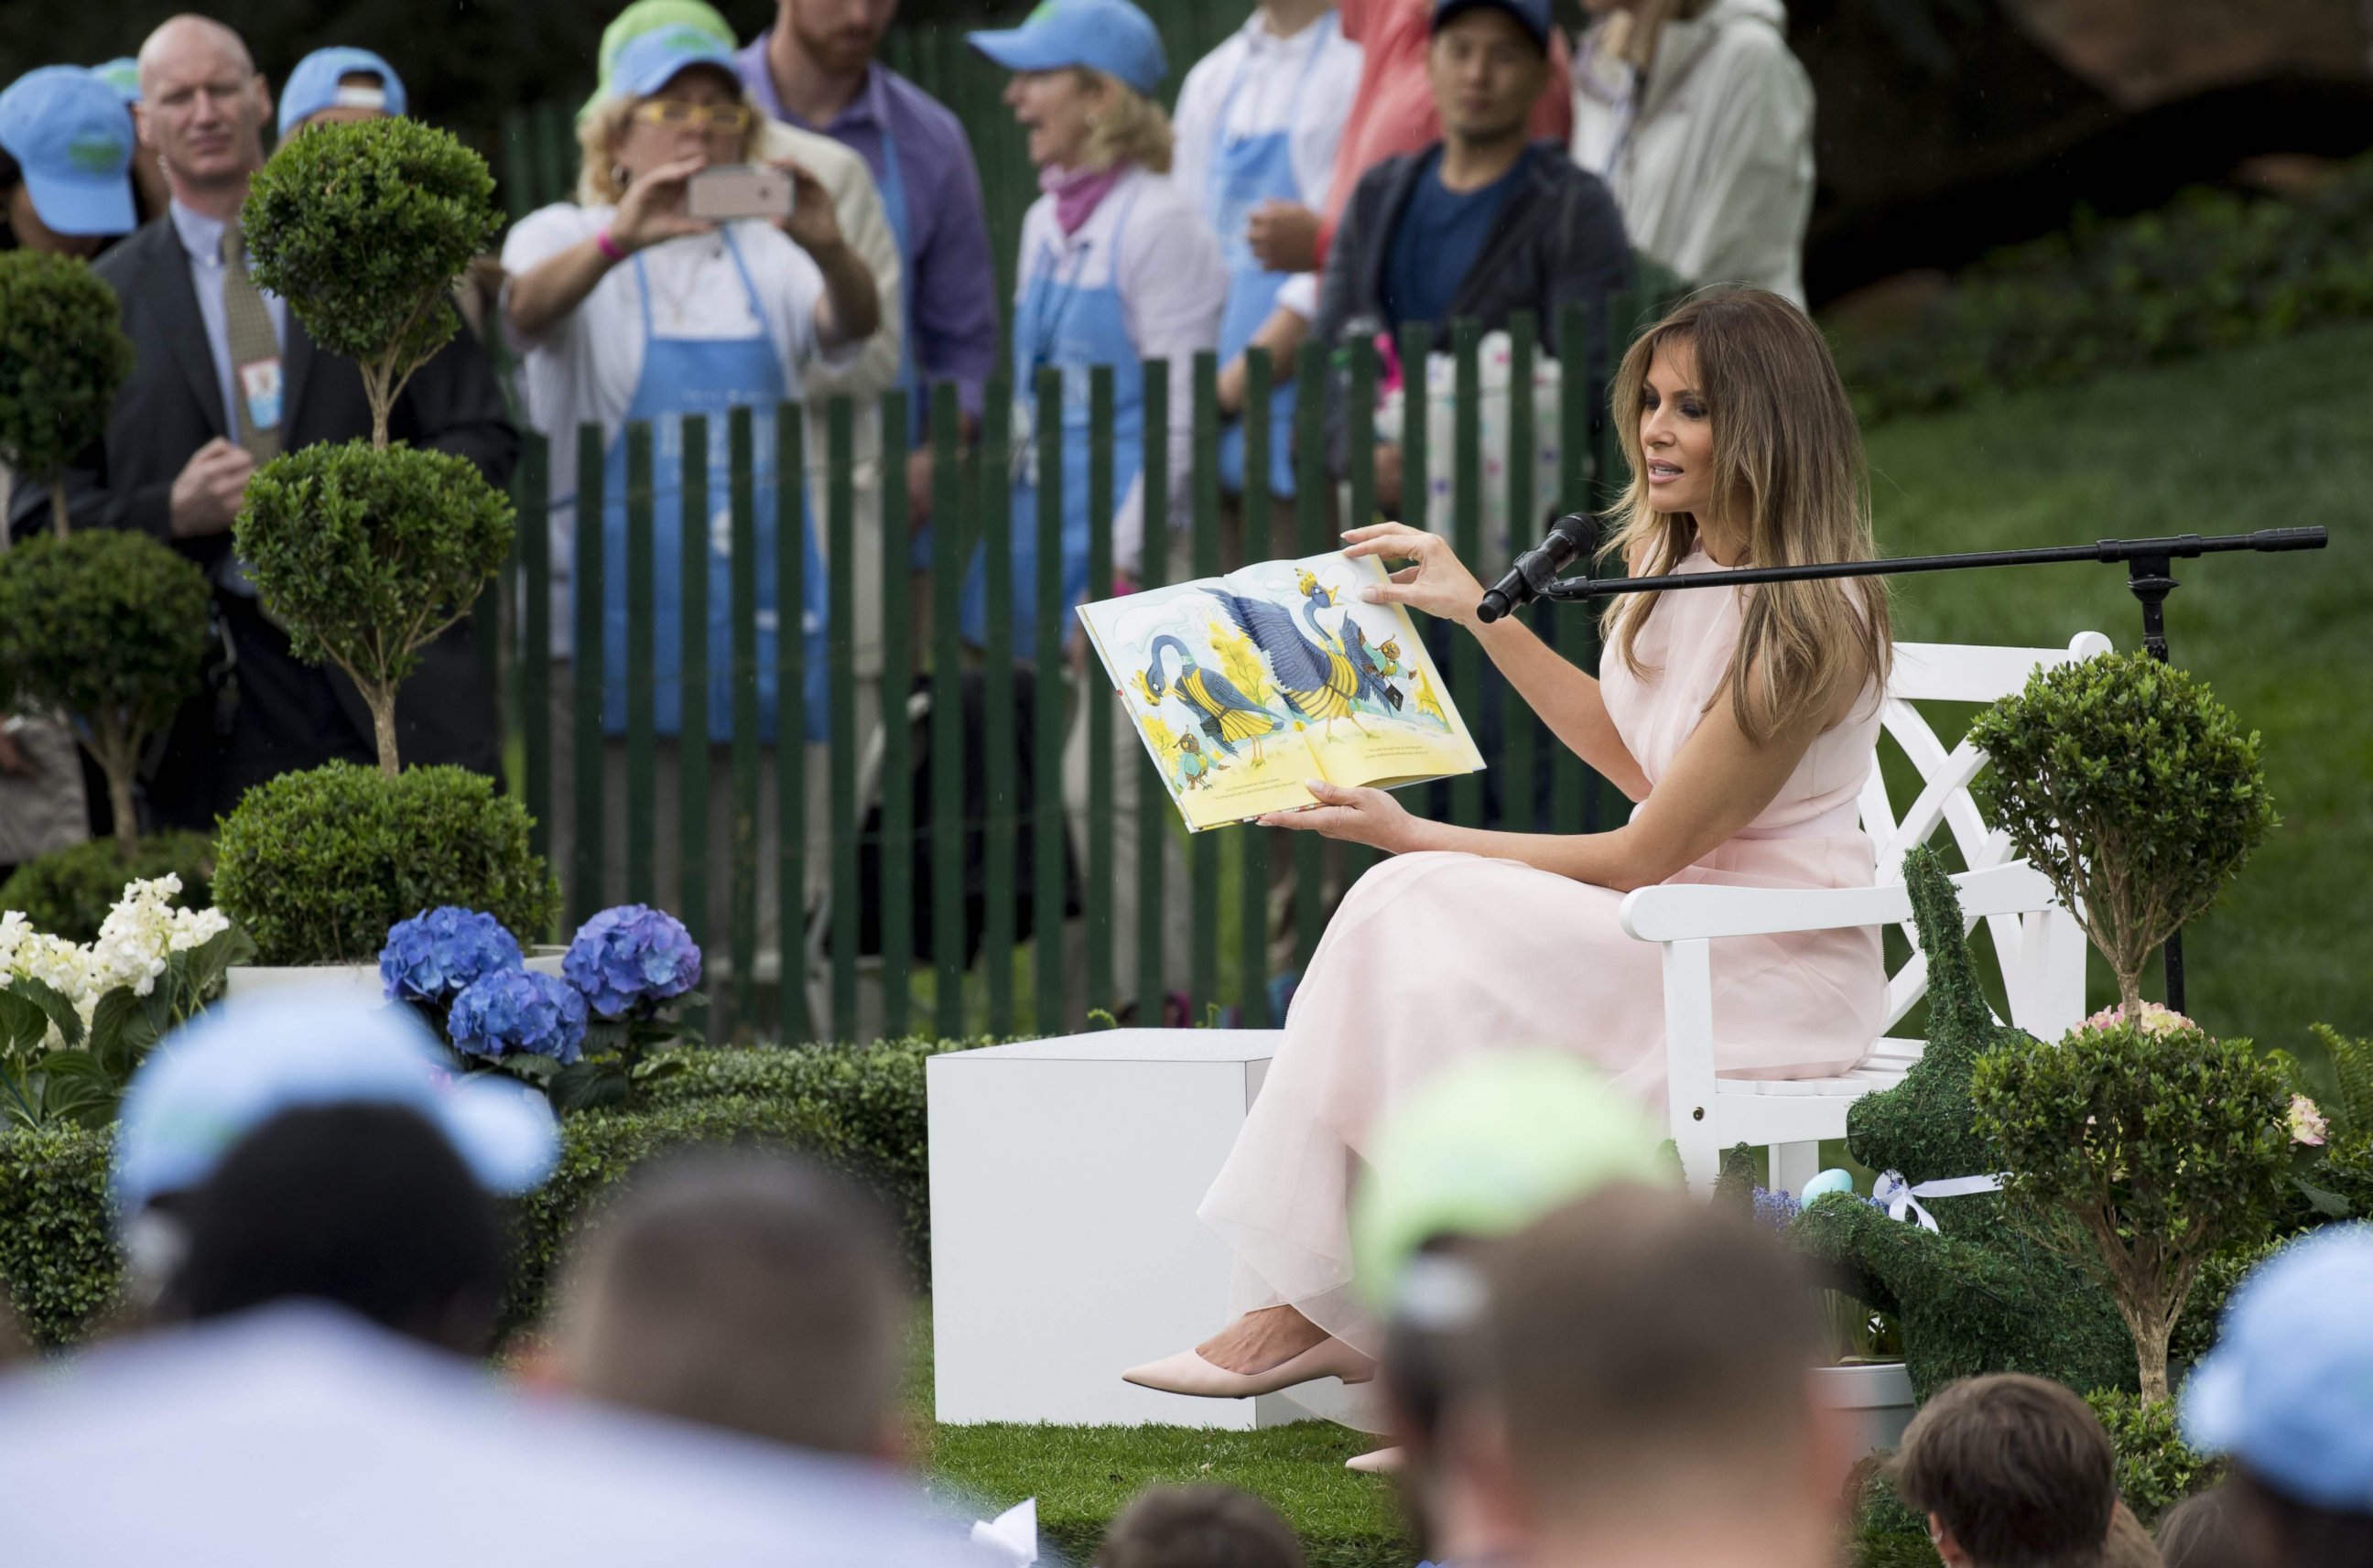 PHOTO: First lady Melania Trump reads a book during the 139th White House Easter Egg Roll on the South Lawn of the White House in Washington, April 17, 2017.